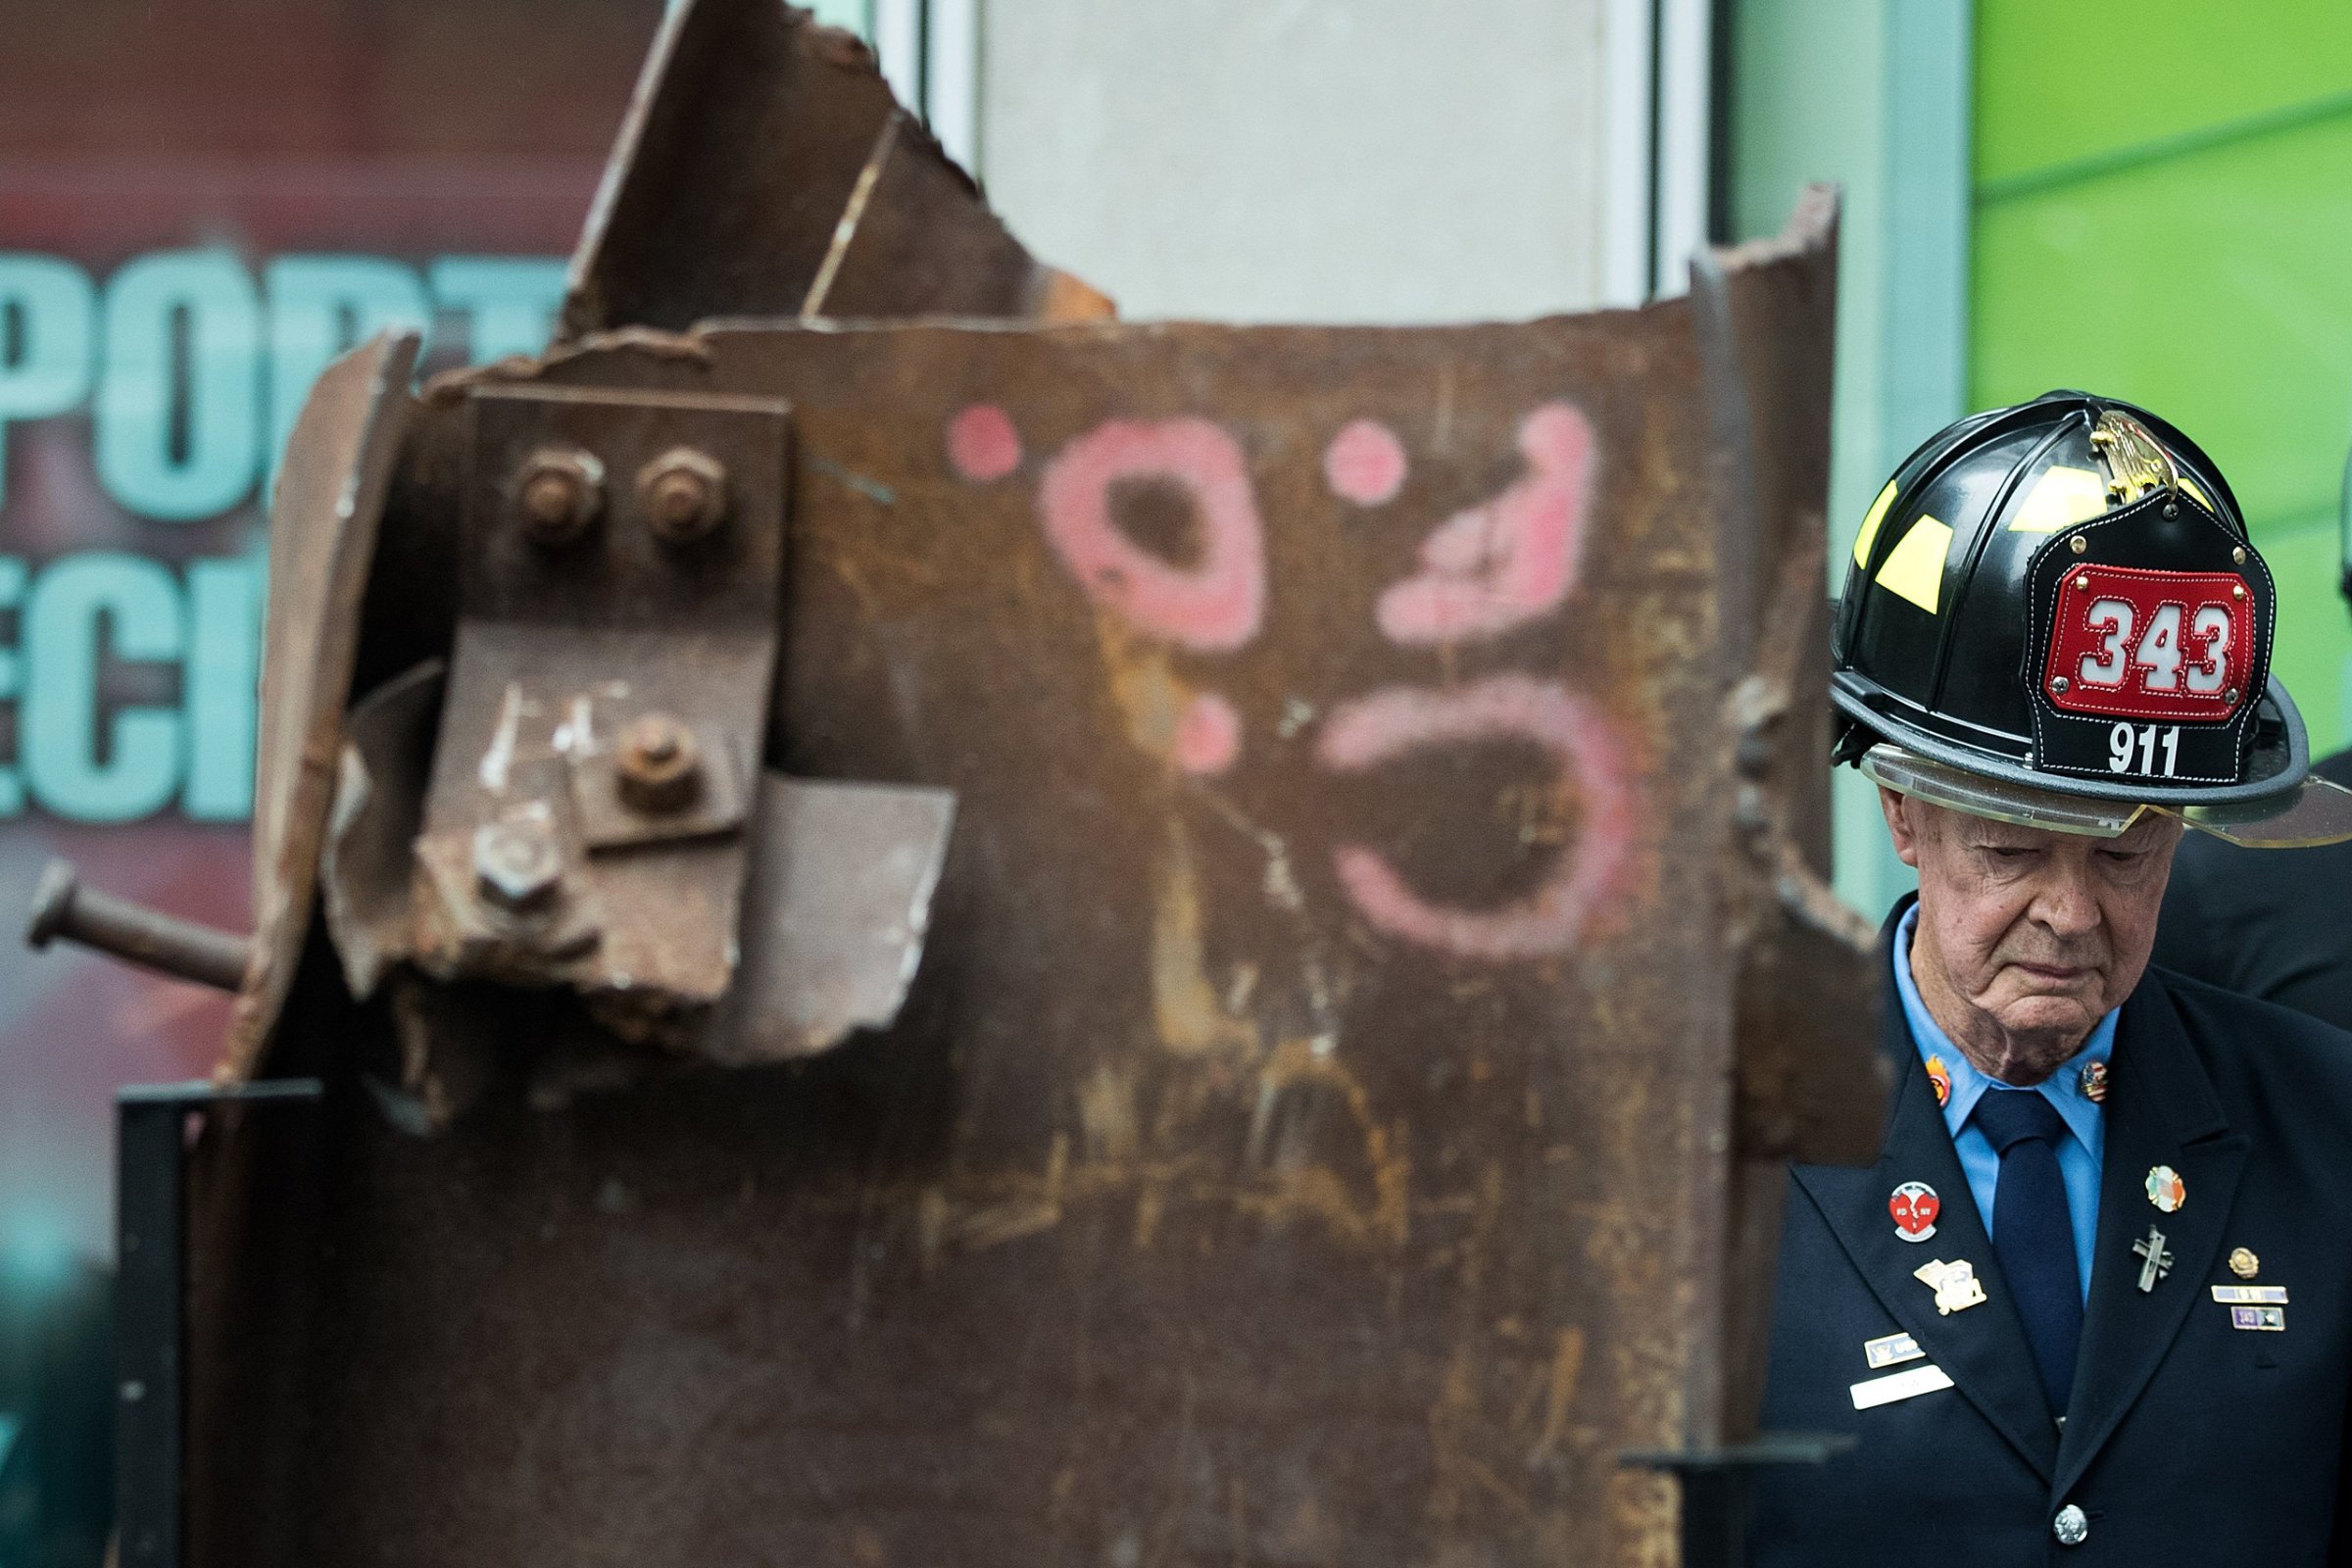 Bob Beckwith, retired firefighter who stood next to President George W. Bush at ground zero, stands next to a piece of steel from the World Trade Center, during a ceremony outside the Fox News studios to mark the beginning of the piece of steel's journey from New York City to Gander, Newfoundland in Canada, in New York City on Sept. 6, 2016.